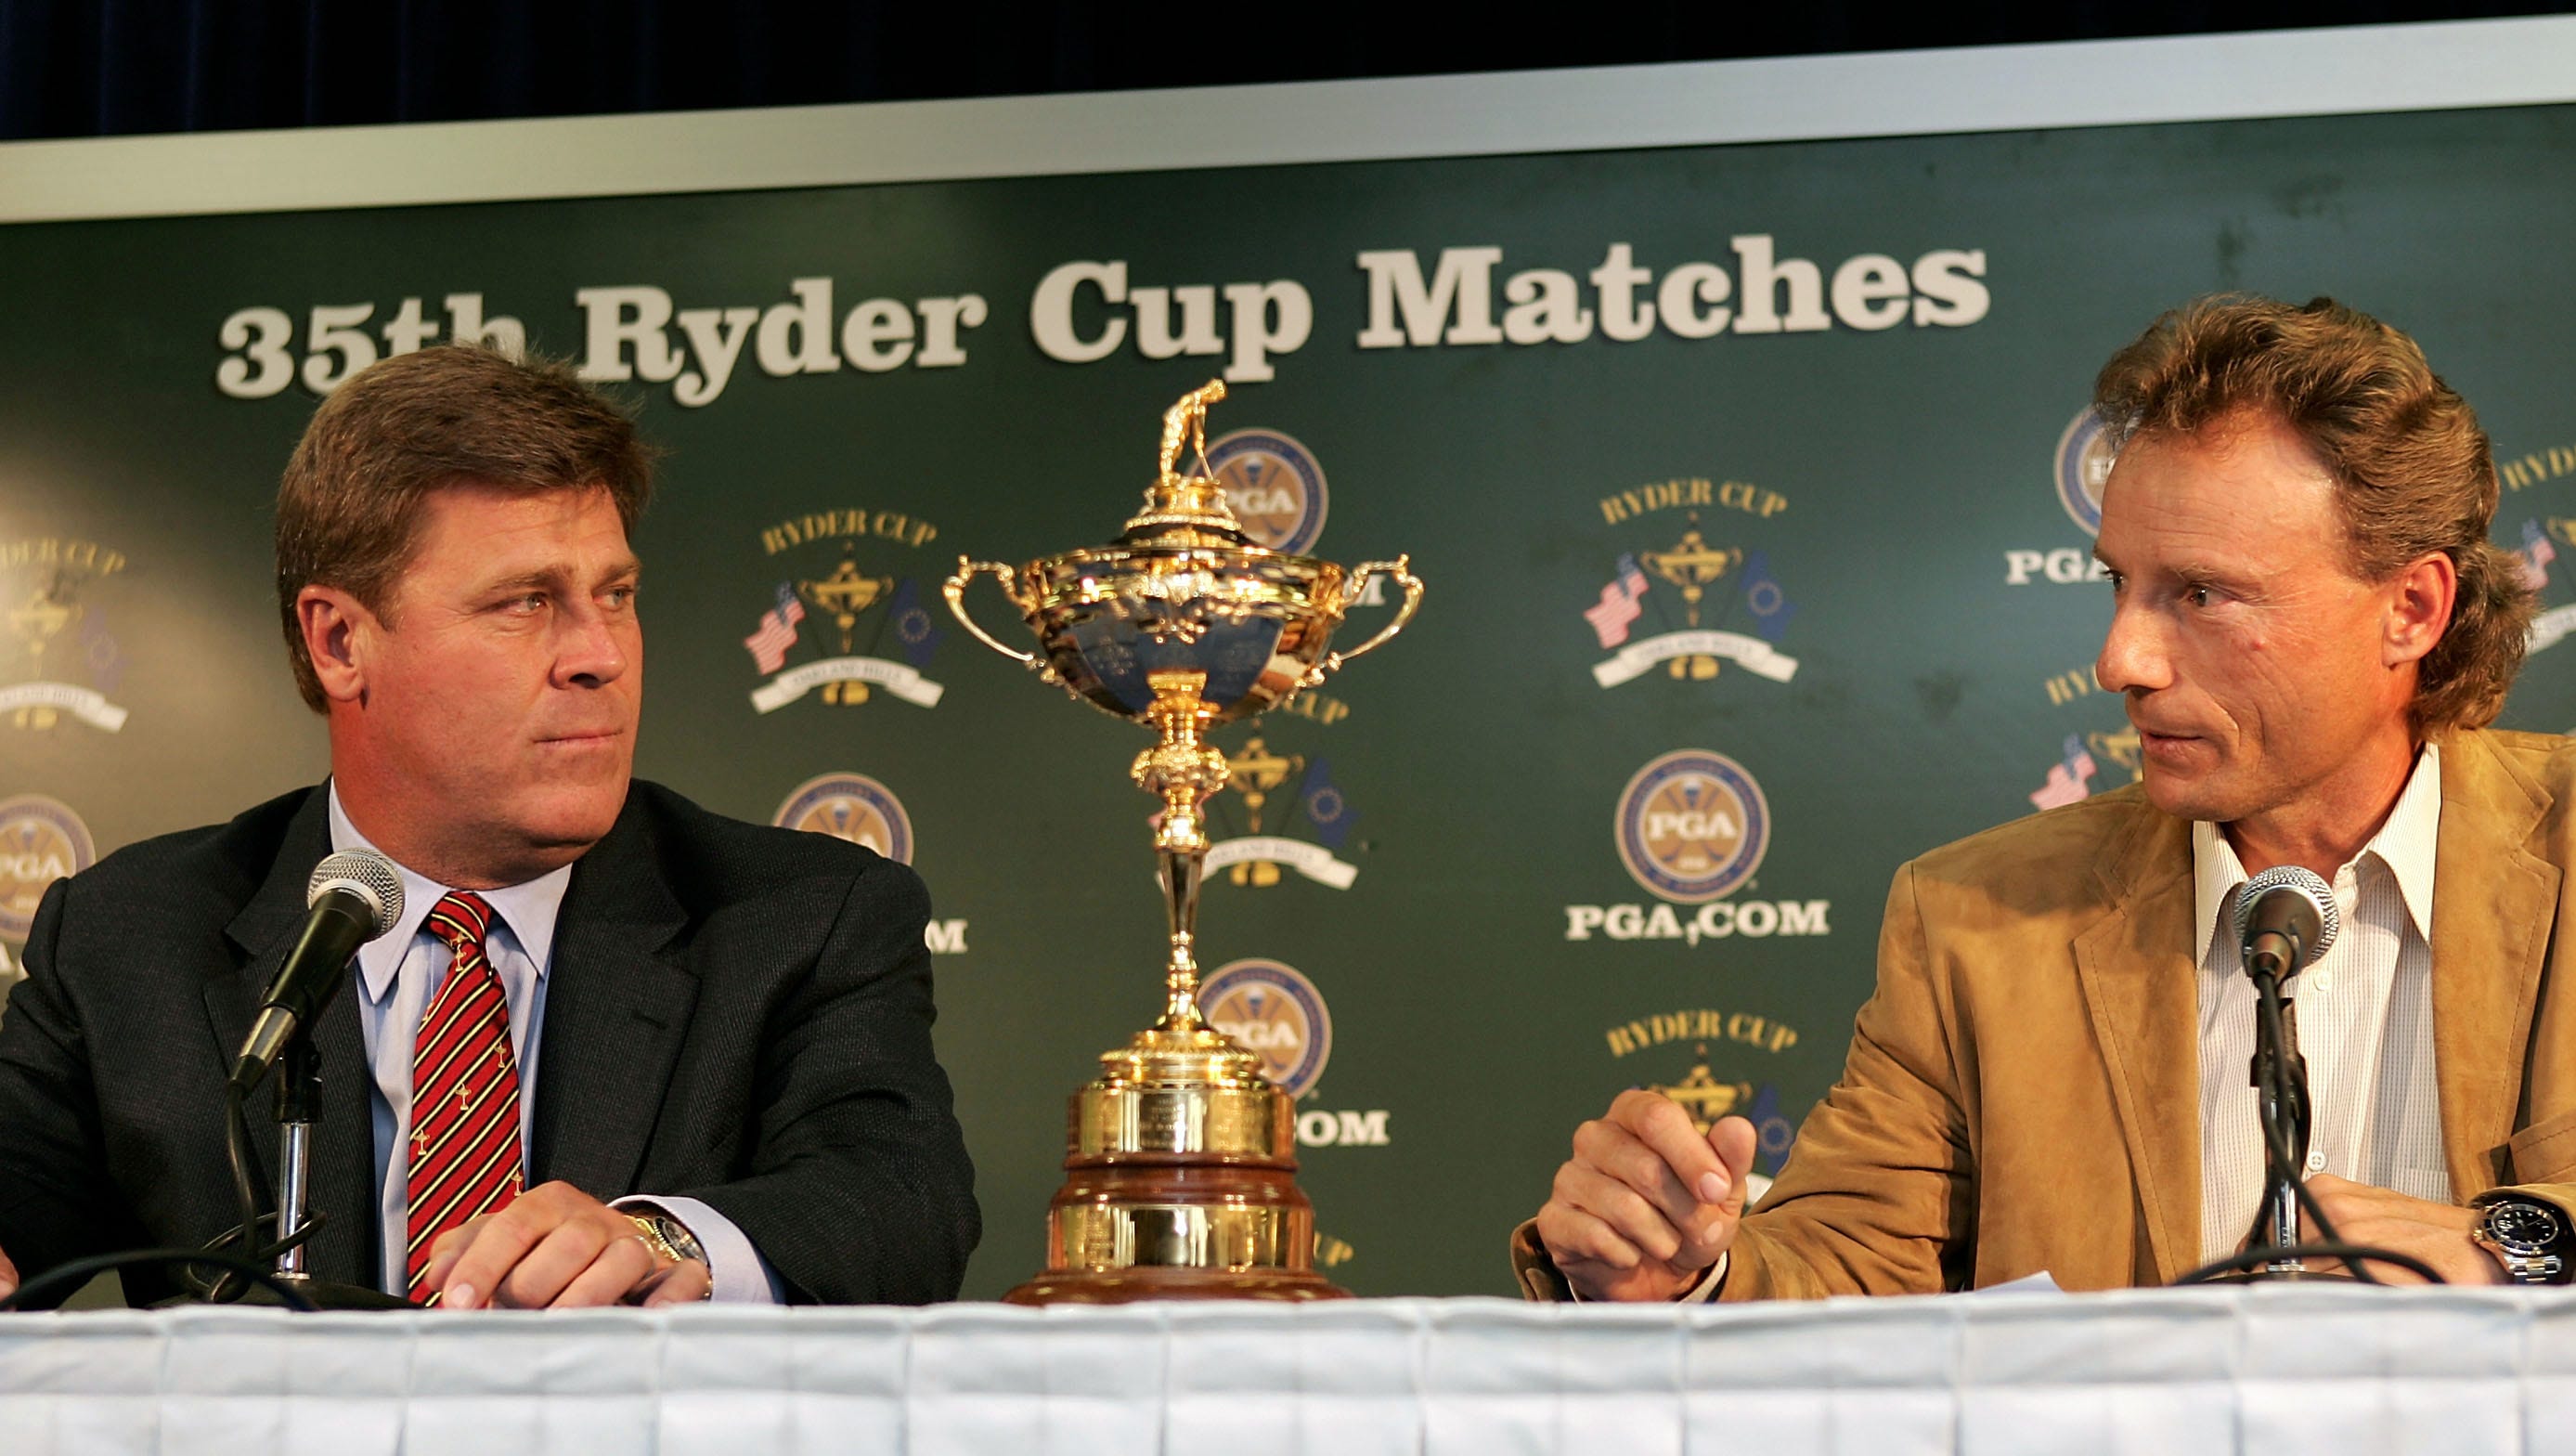 Team USA captain Hal Sutton, left, and Team Europe captain Bernard Langer stare each other down prior to the start of the 2004 Ryder Cup. Team Europe won, 18.5-9.5